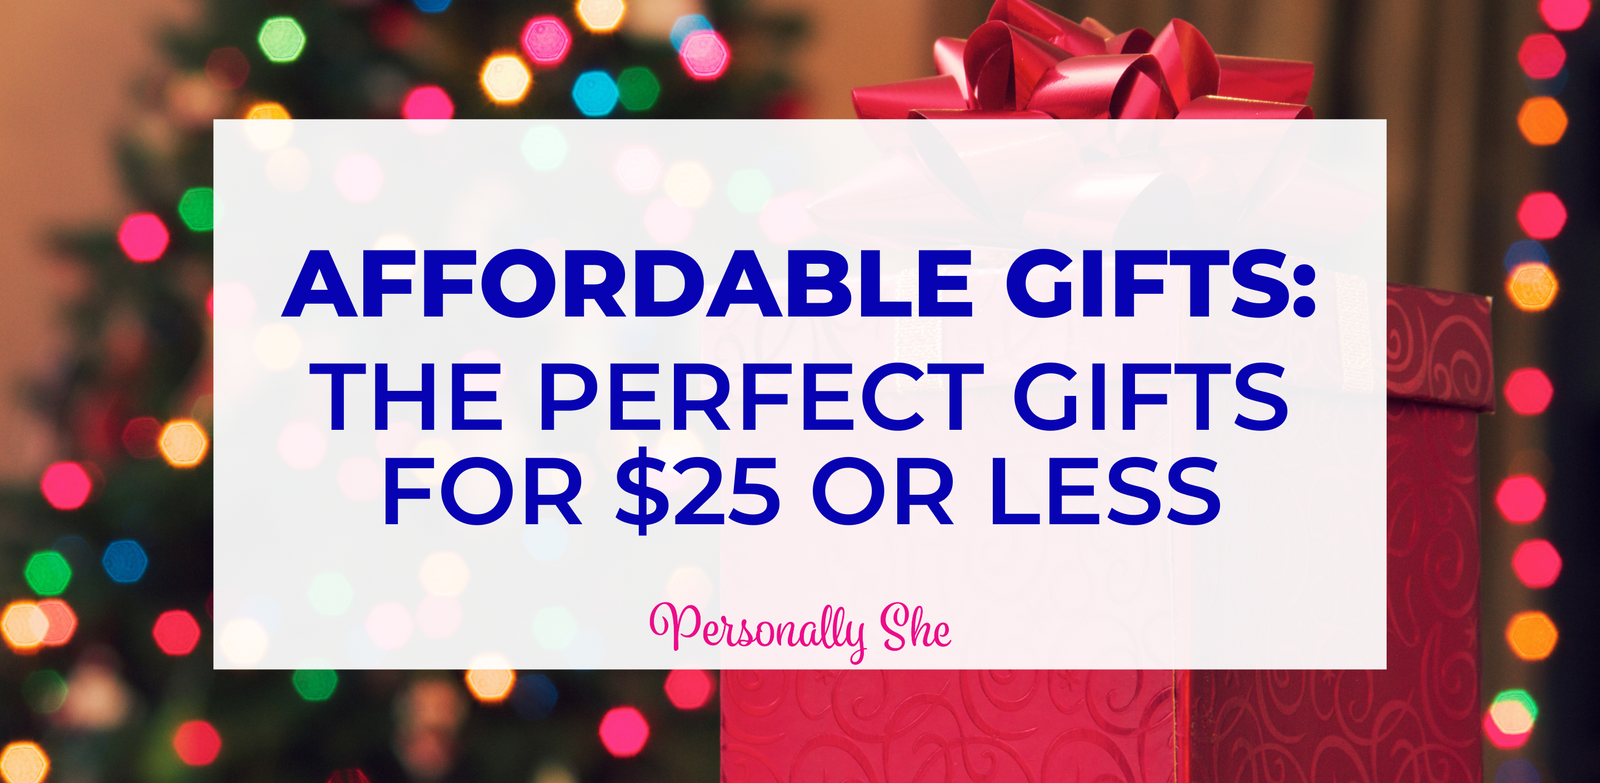 Affordable Gifts: The Perfect Gifts for $25 or Less